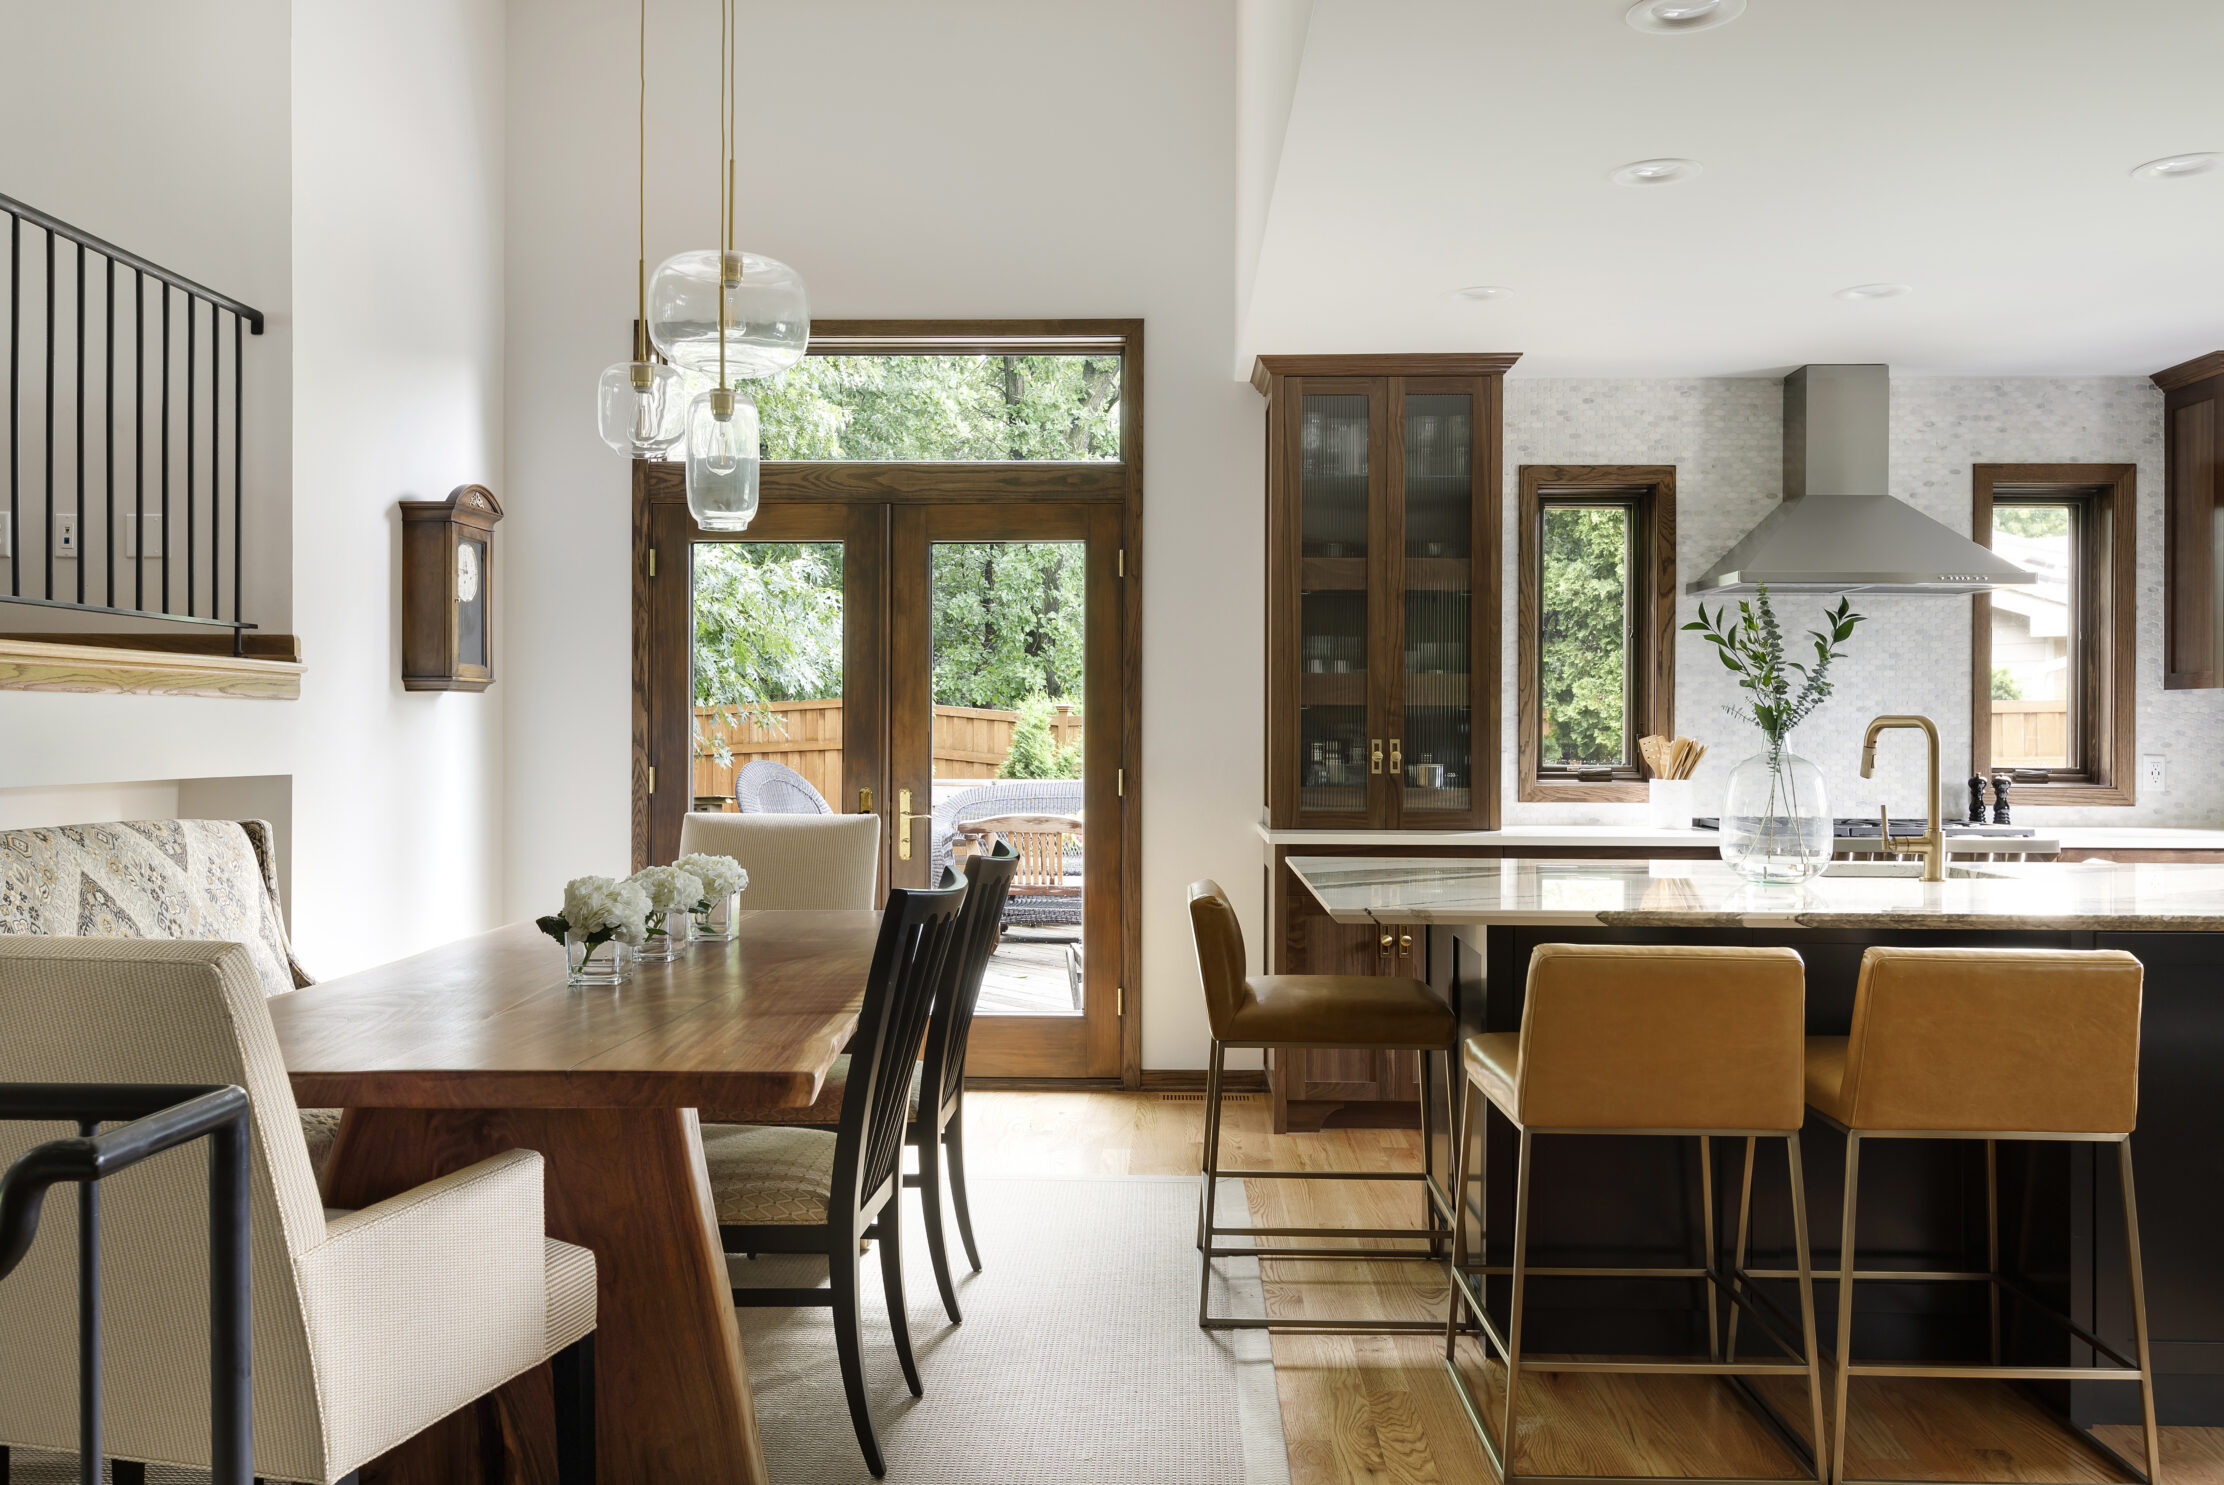 Dining room statement lighting in a chef's kitchen with brown wooden accents.